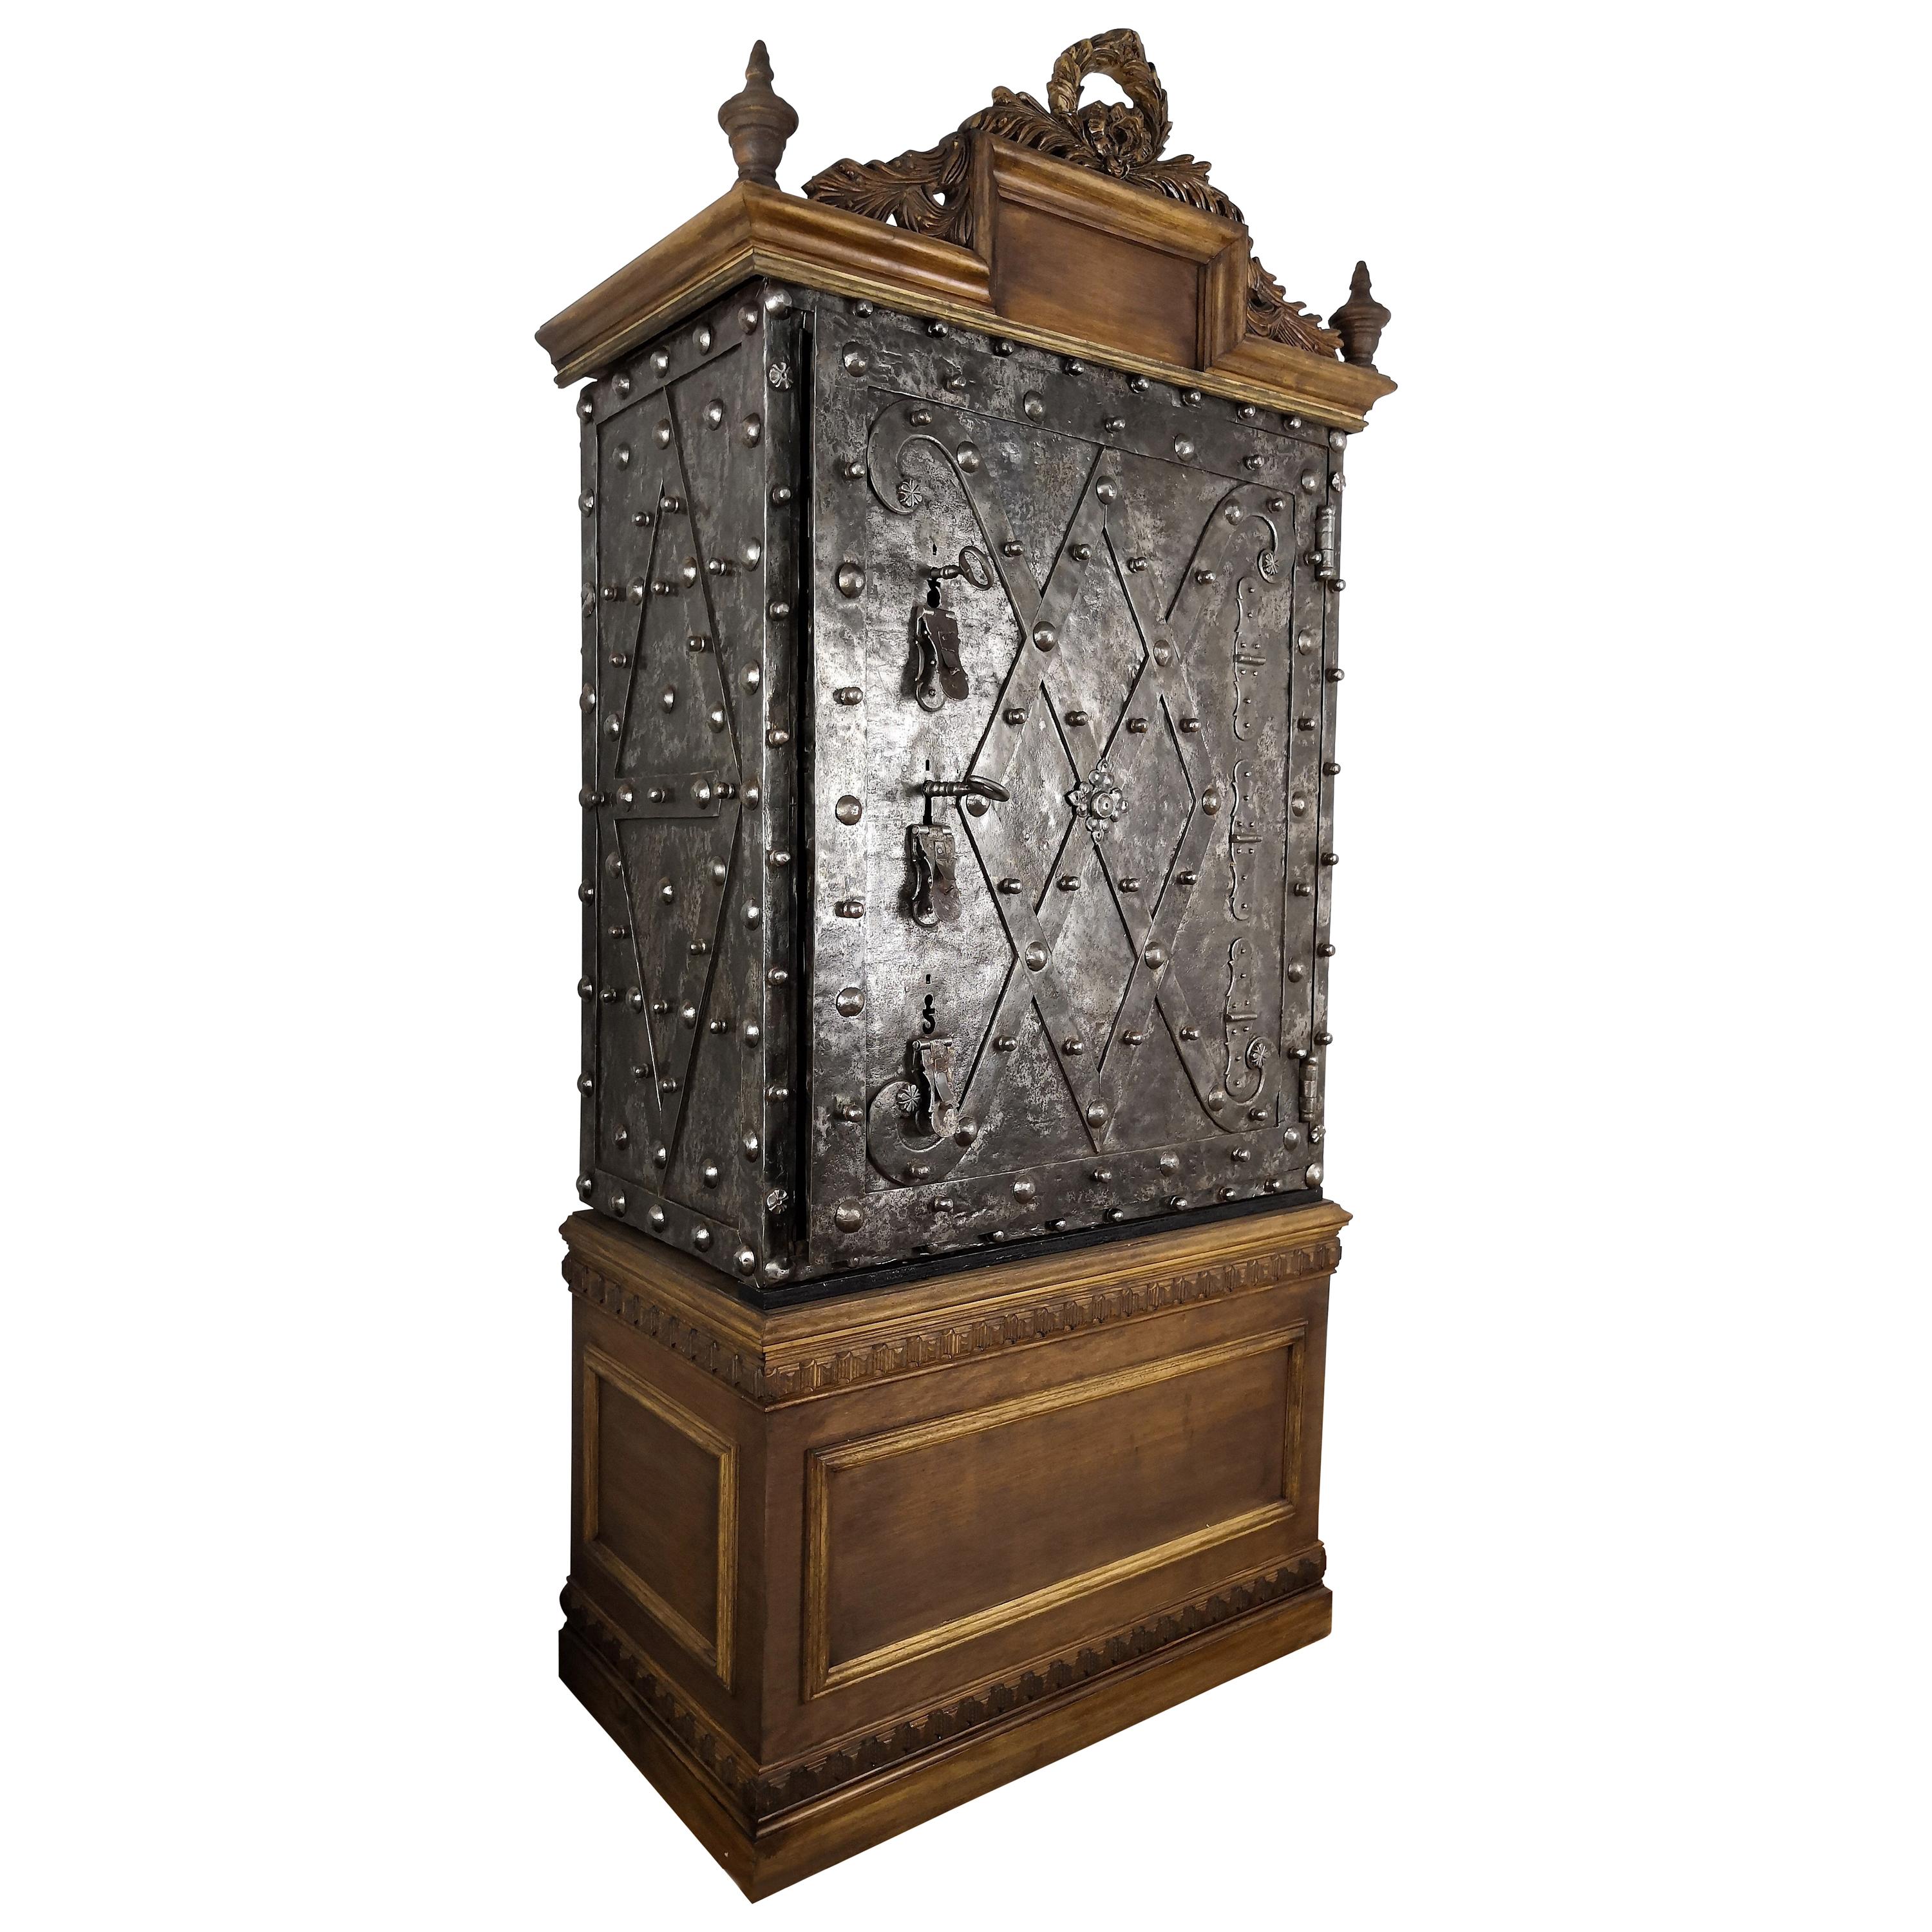 18th Century Italian Wrought Iron Hobnail Antique Safe Dry Bar Watch Cabinet